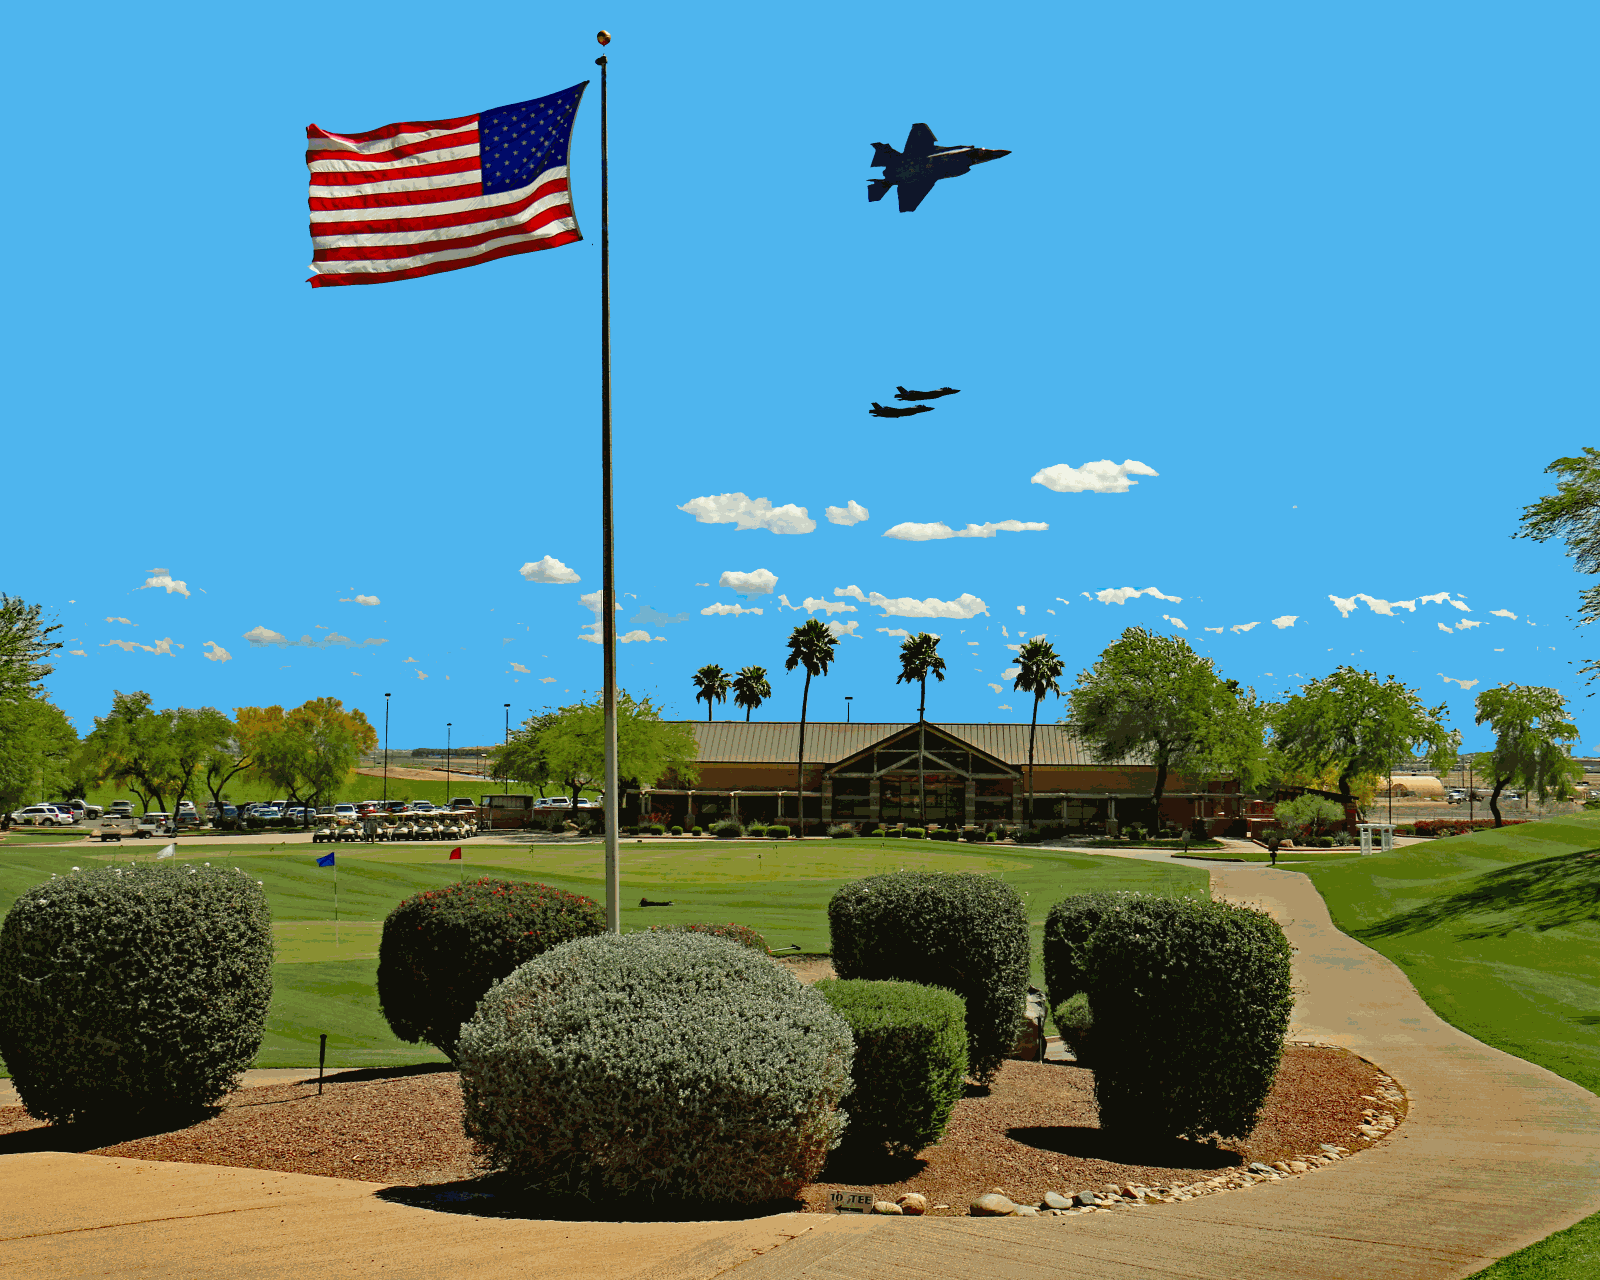 Picture of Falcon Dunes golf course with a United States Flag in the foreground and the clubhouse in the background with two planes overhead.